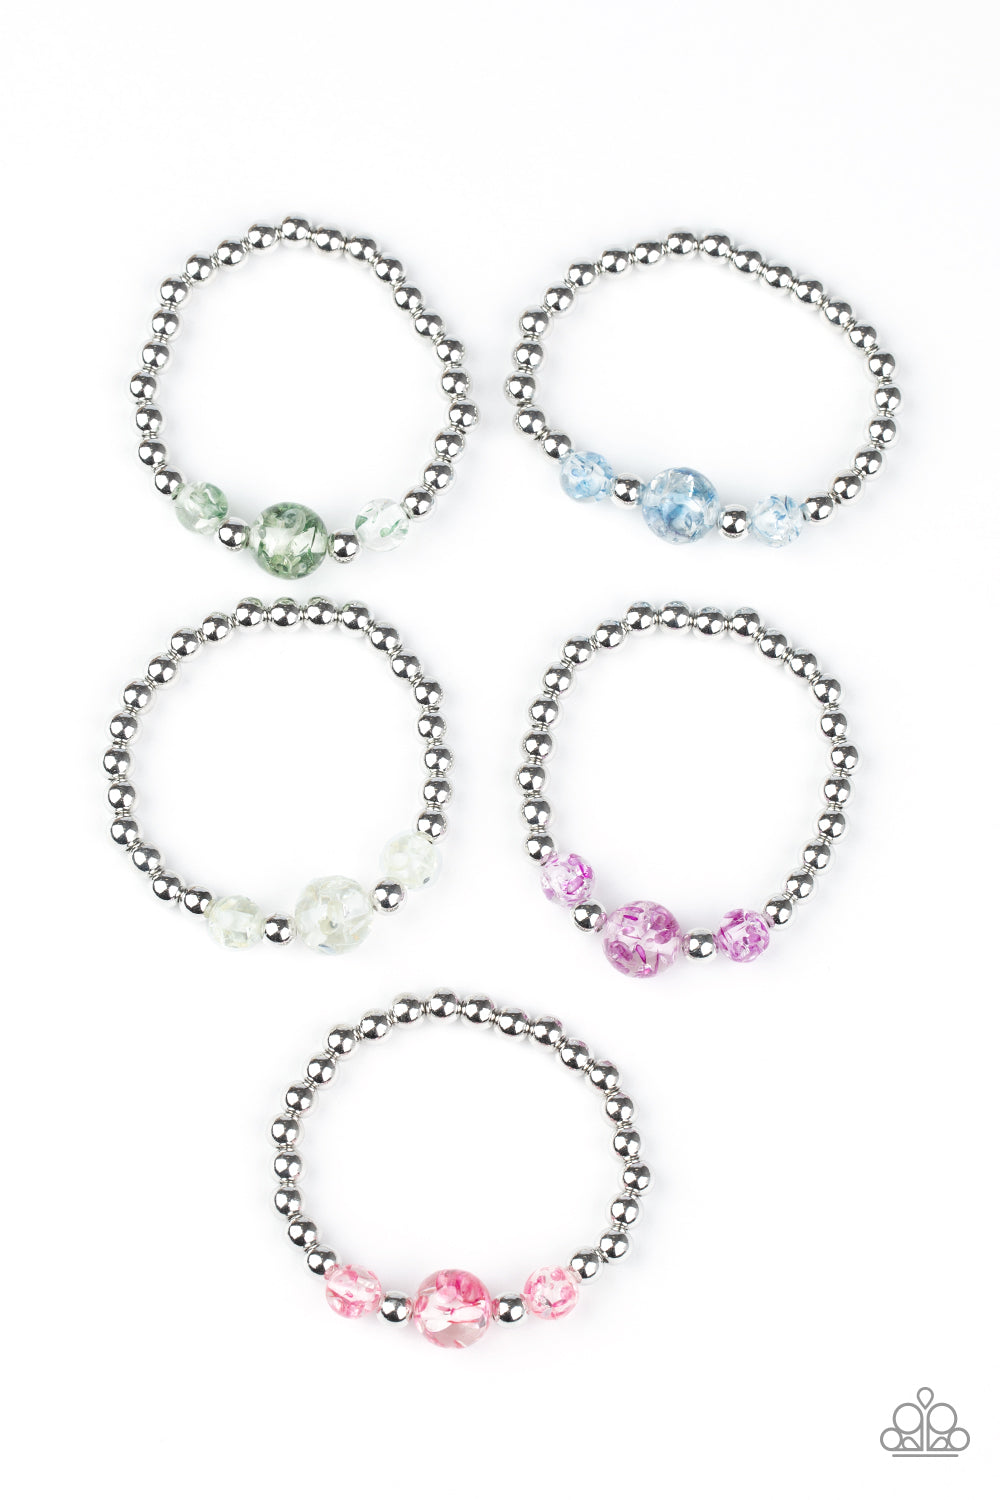 Starlet Shimmer Silver and Glassy Kids Bracelet Paparazzi Accessories. Assorted colors and shapes. 